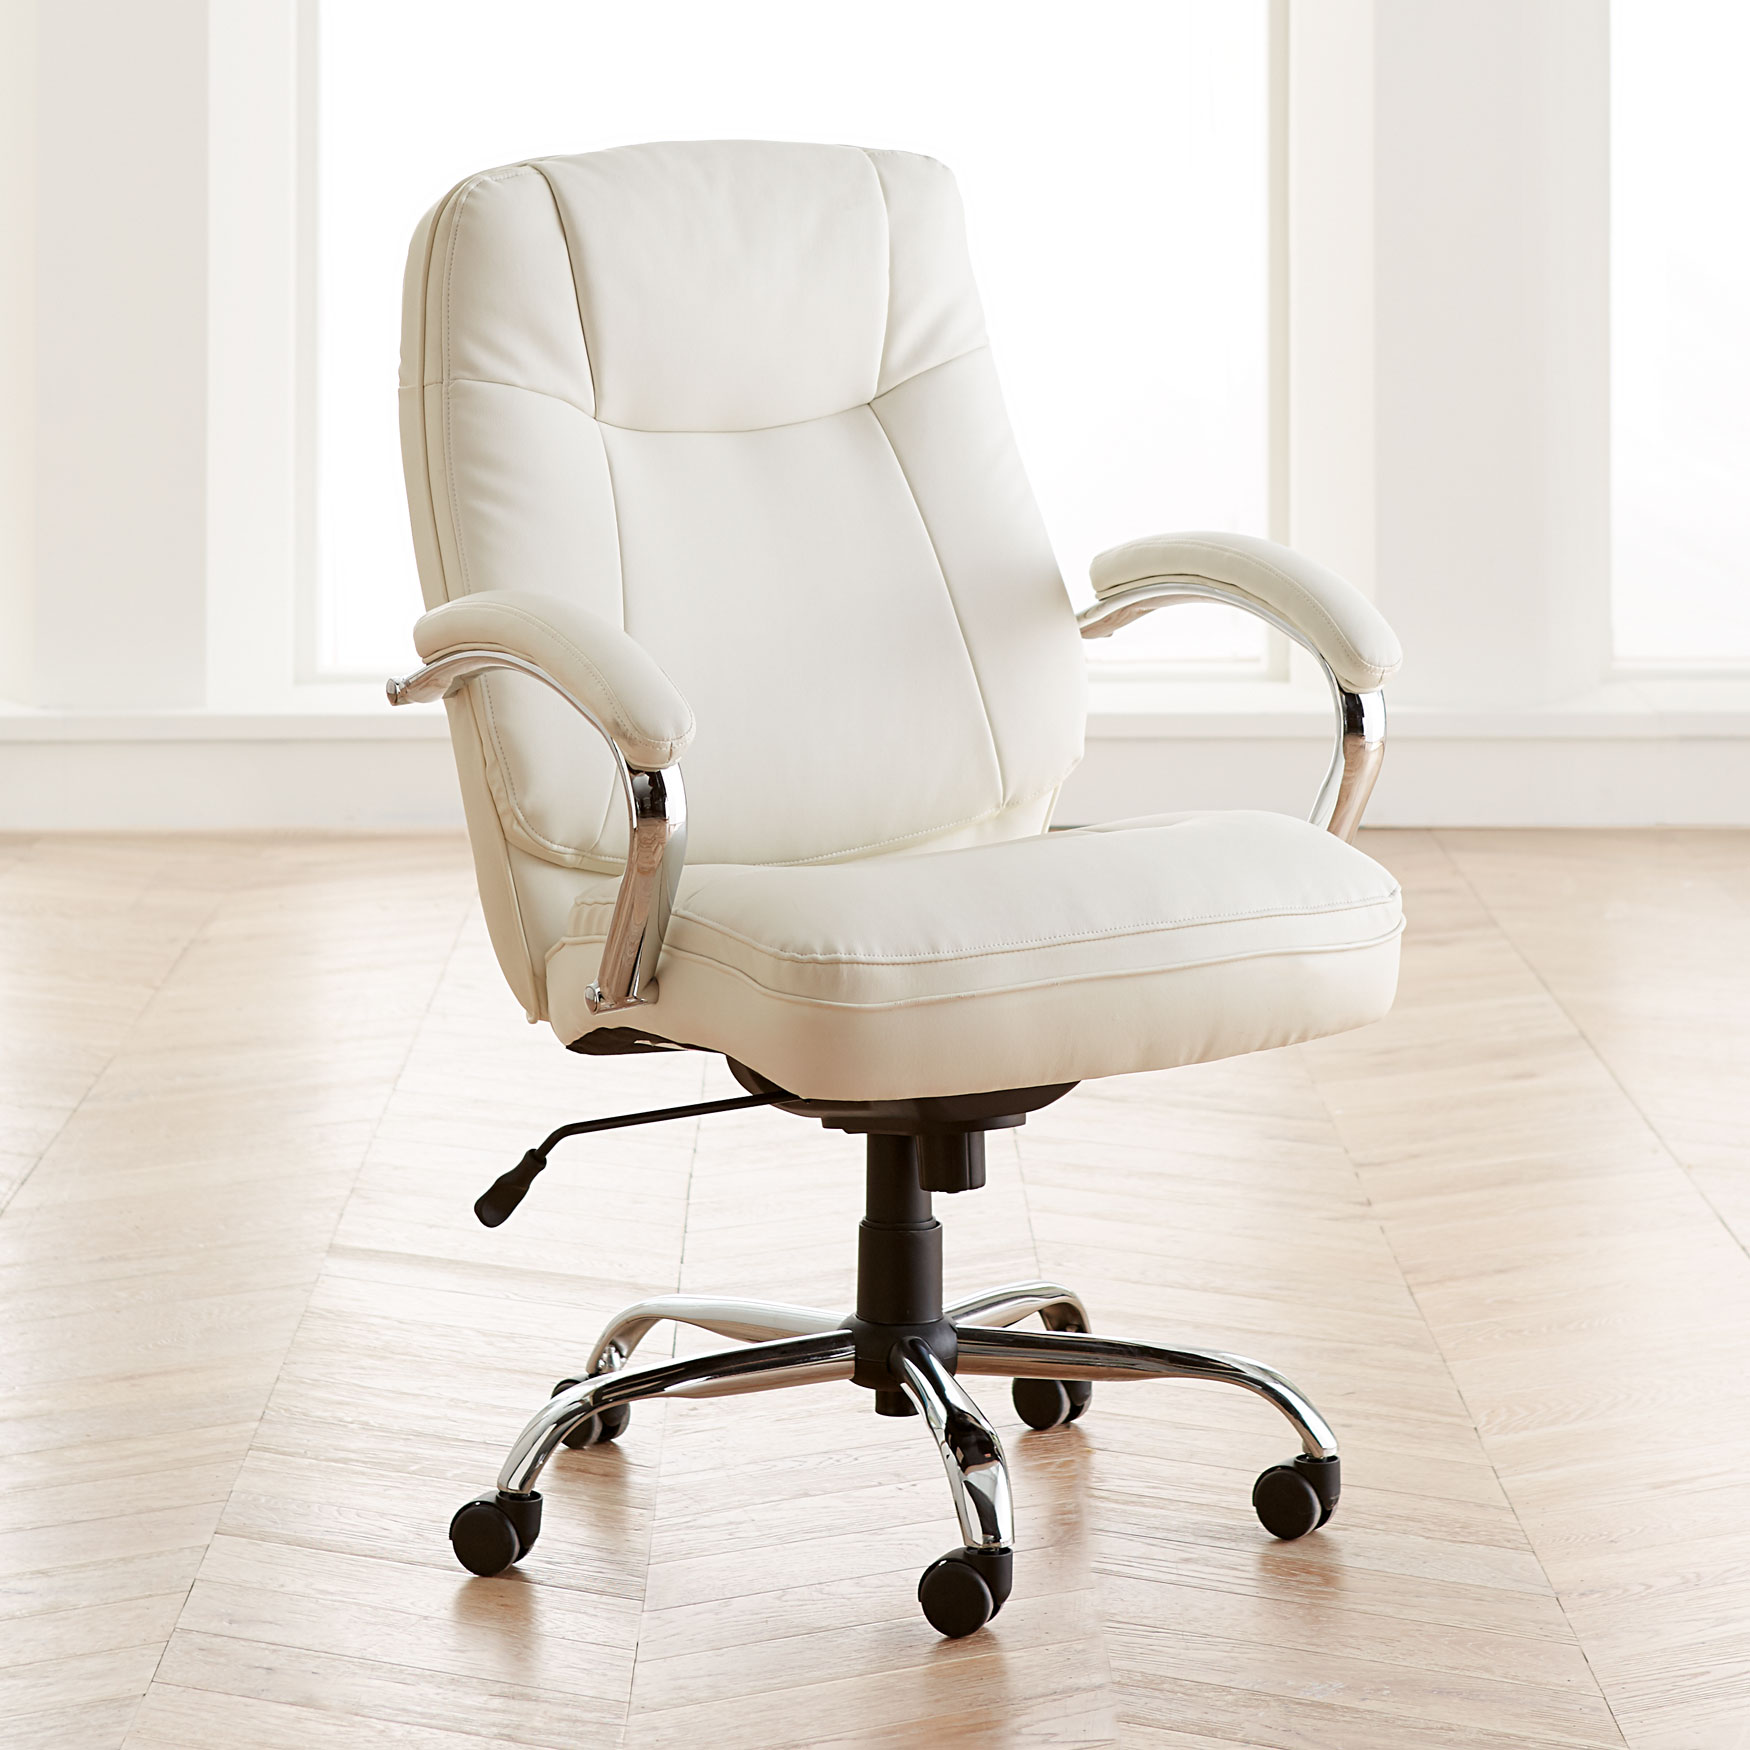 Extra Wide Women's Office Chair | Plus SizeHome Office ...